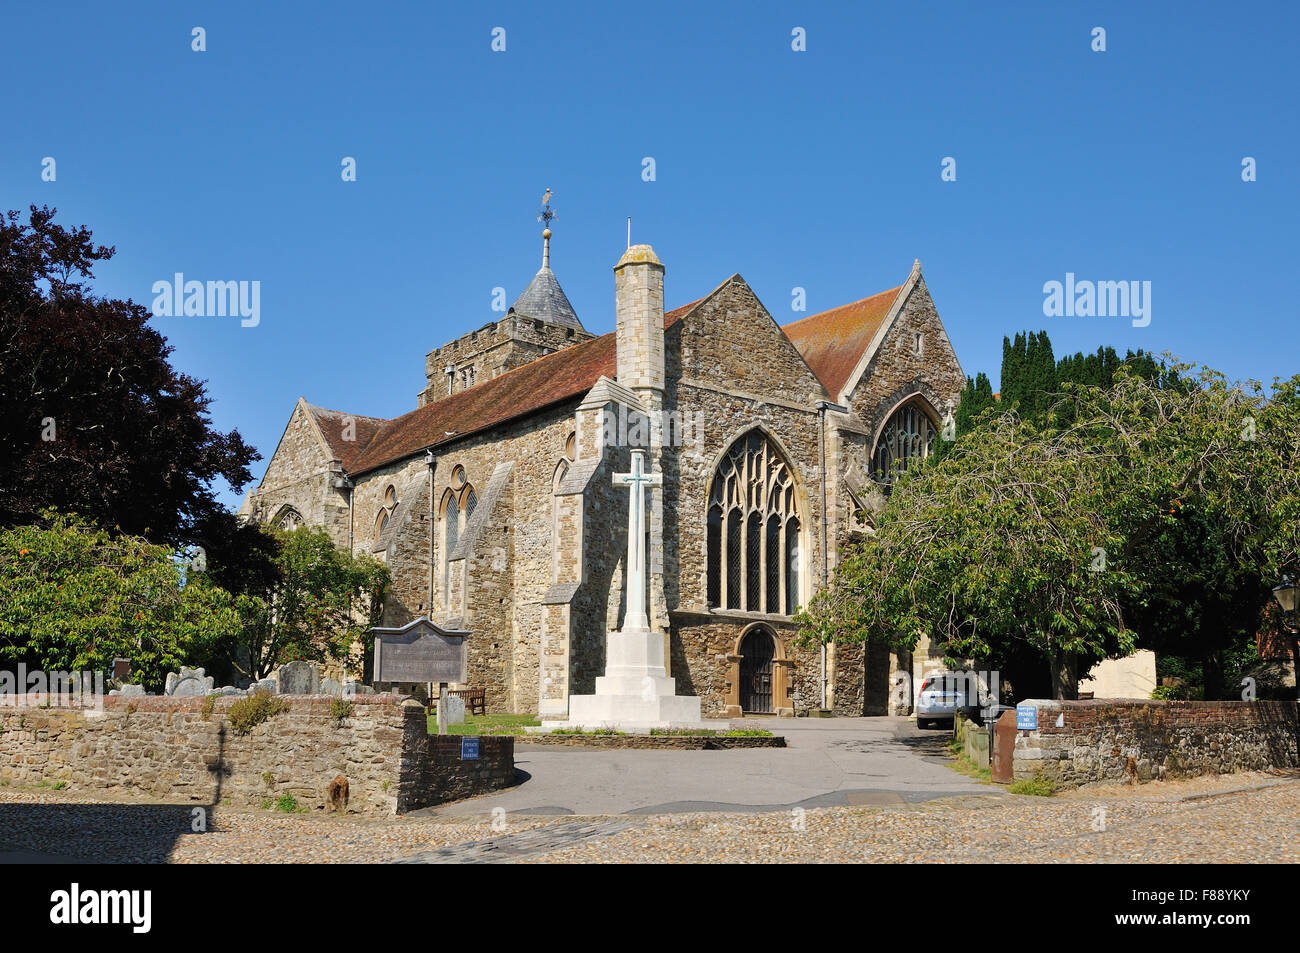 The exterior of the medieval church of St Mary, from Church Square, in the historic town of Rye, East Sussex, UK Stock Photo